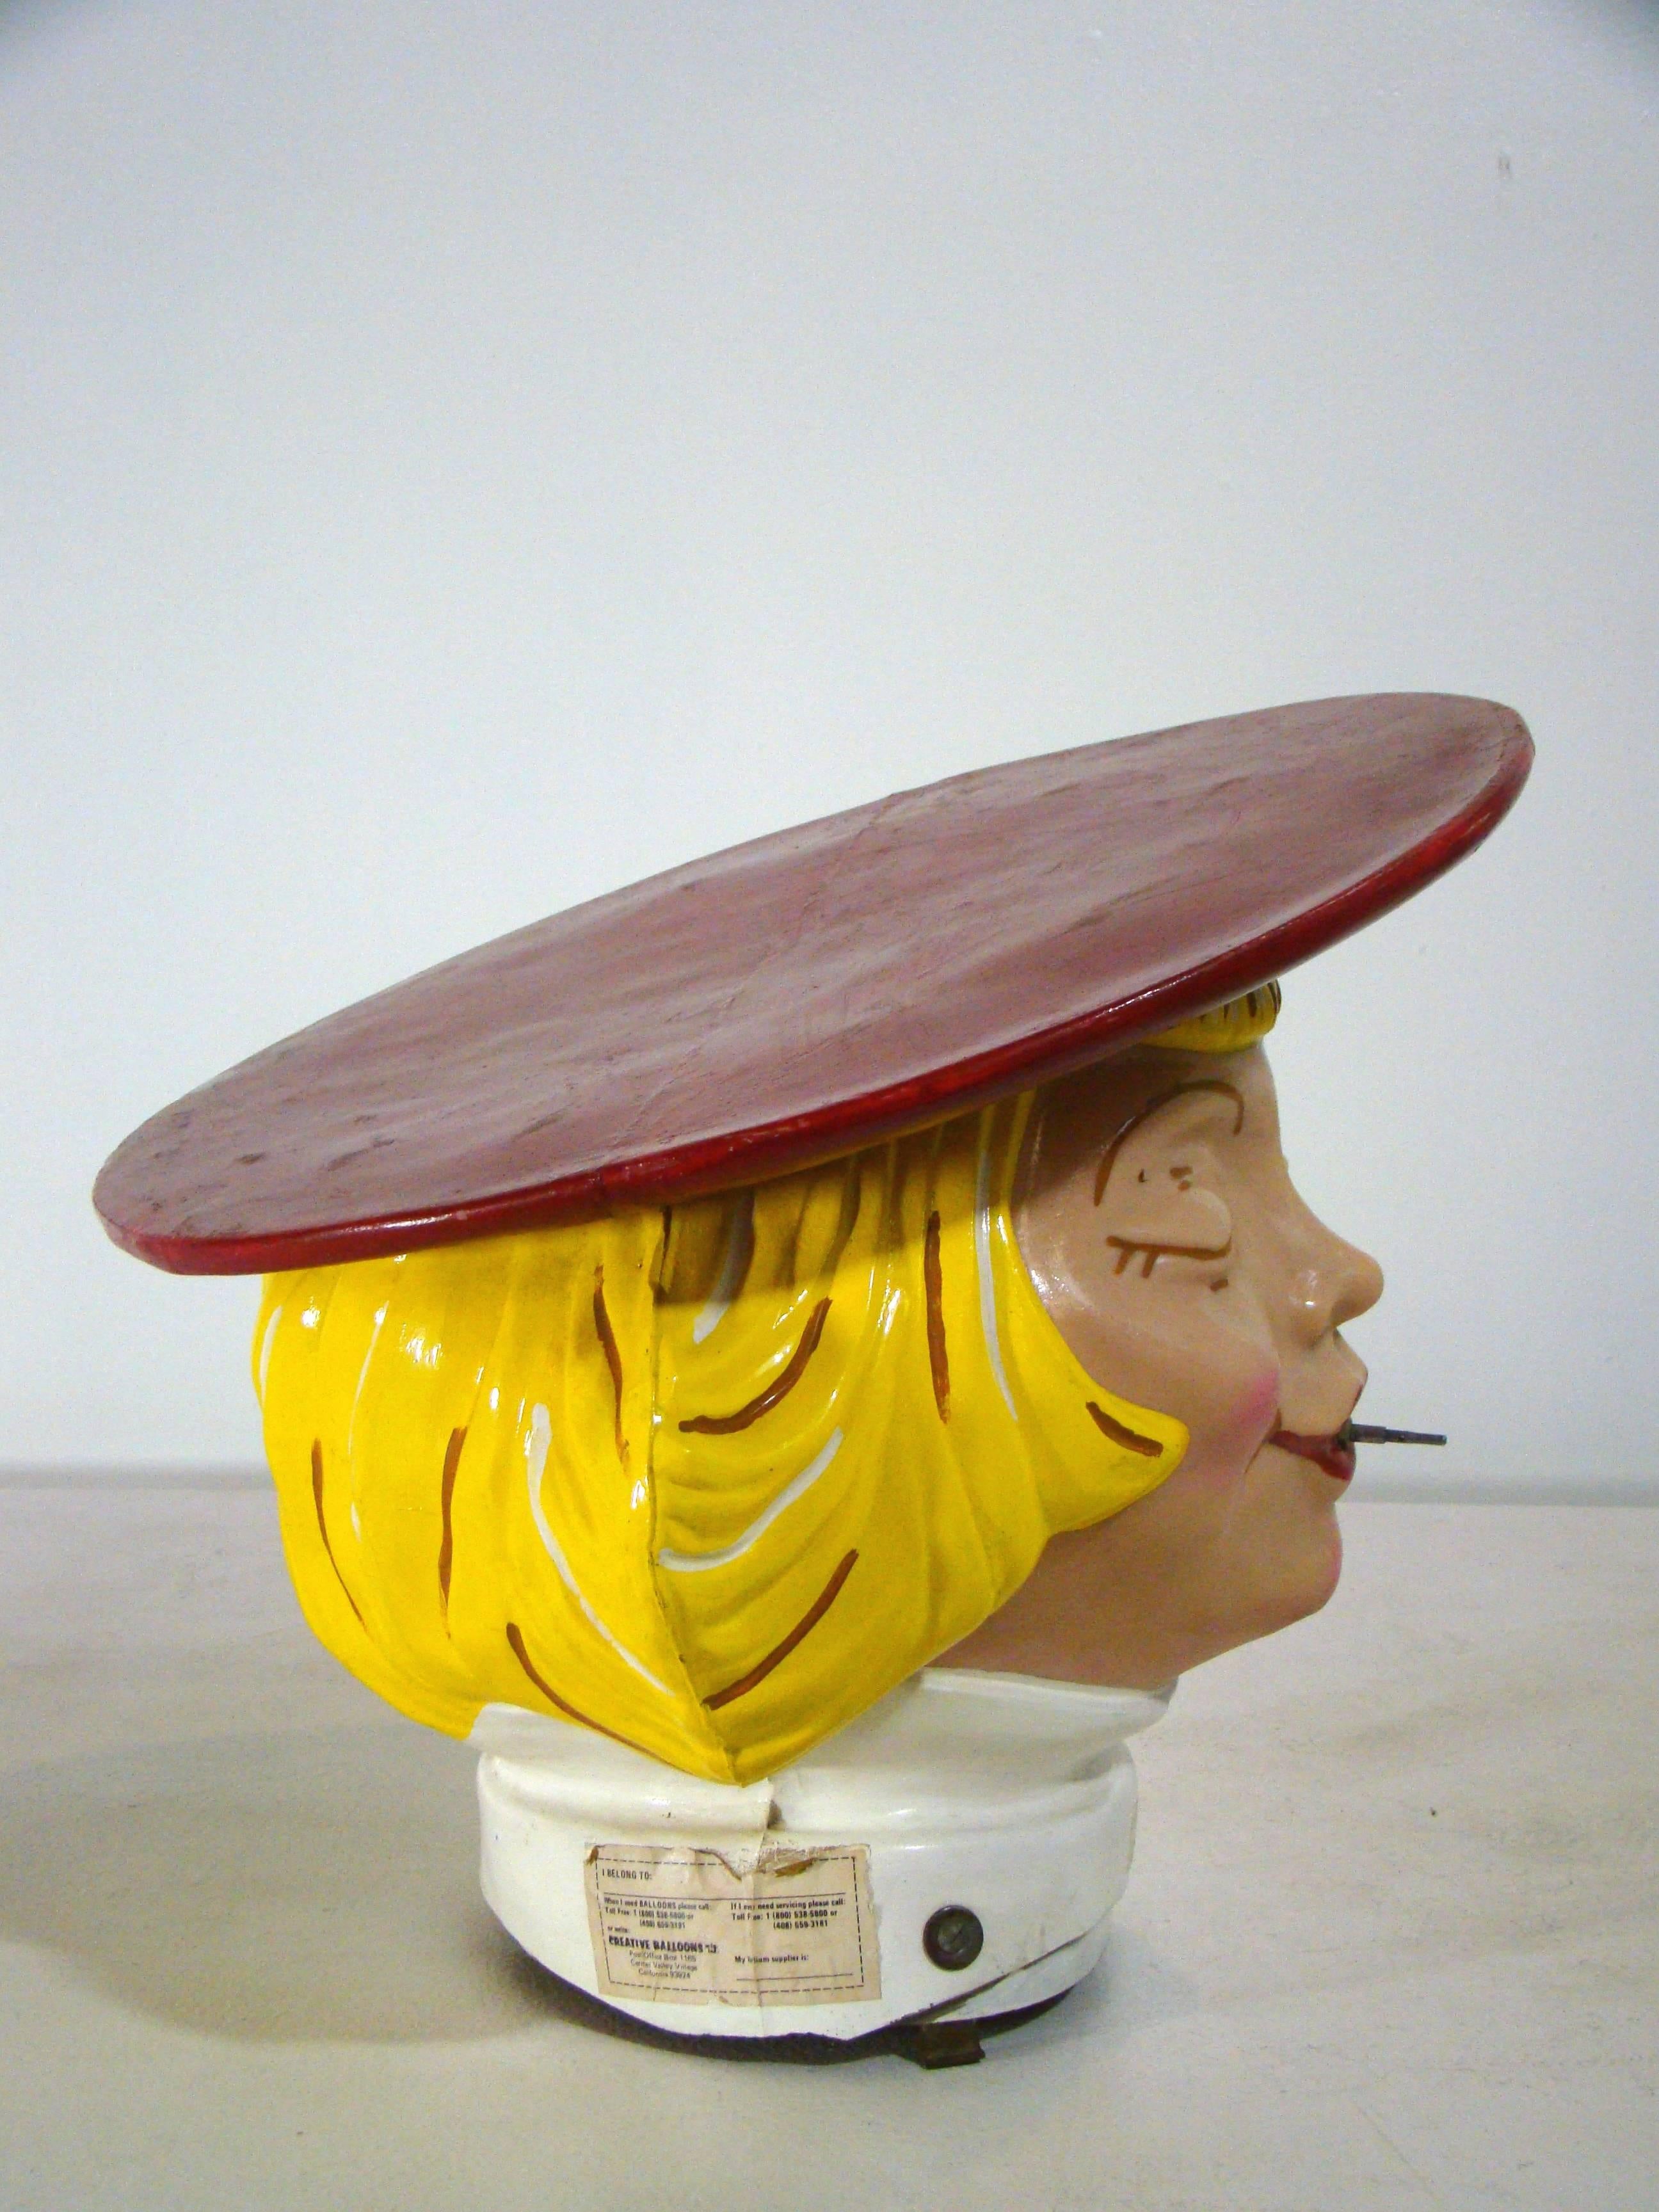 Buster Brown Shoe Store Fiberglass Advertising Display Piece, circa 1970s In Good Condition For Sale In Denver, CO